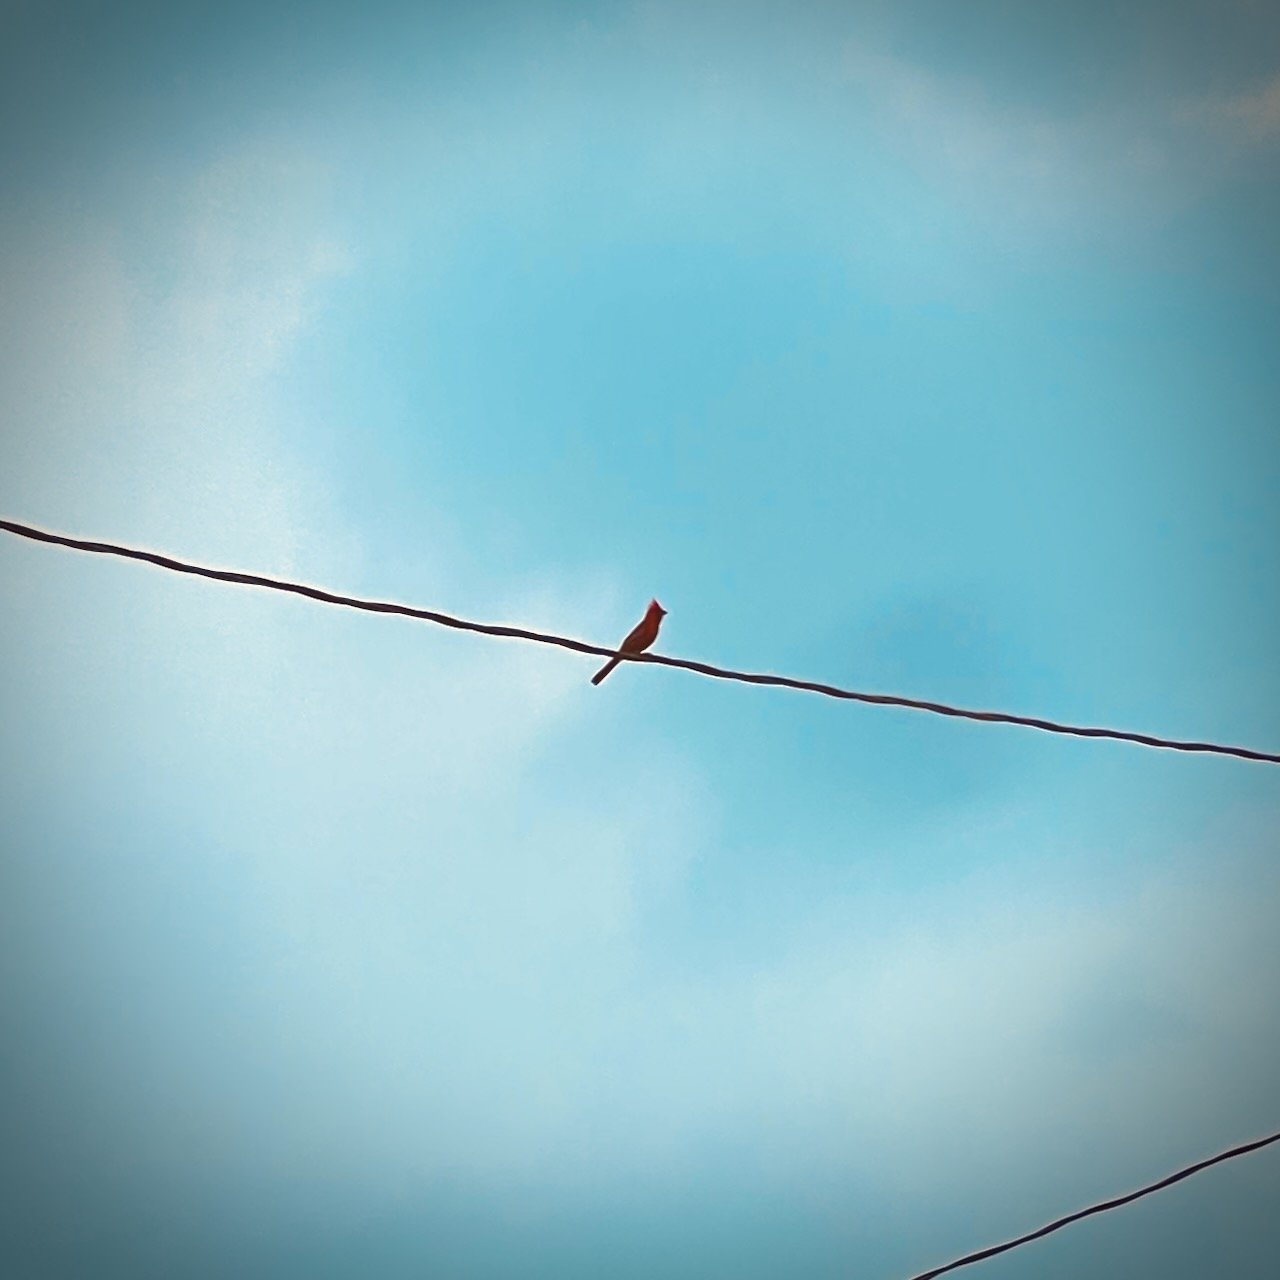 Cardinal perched on a wire with a partly cloudy sky